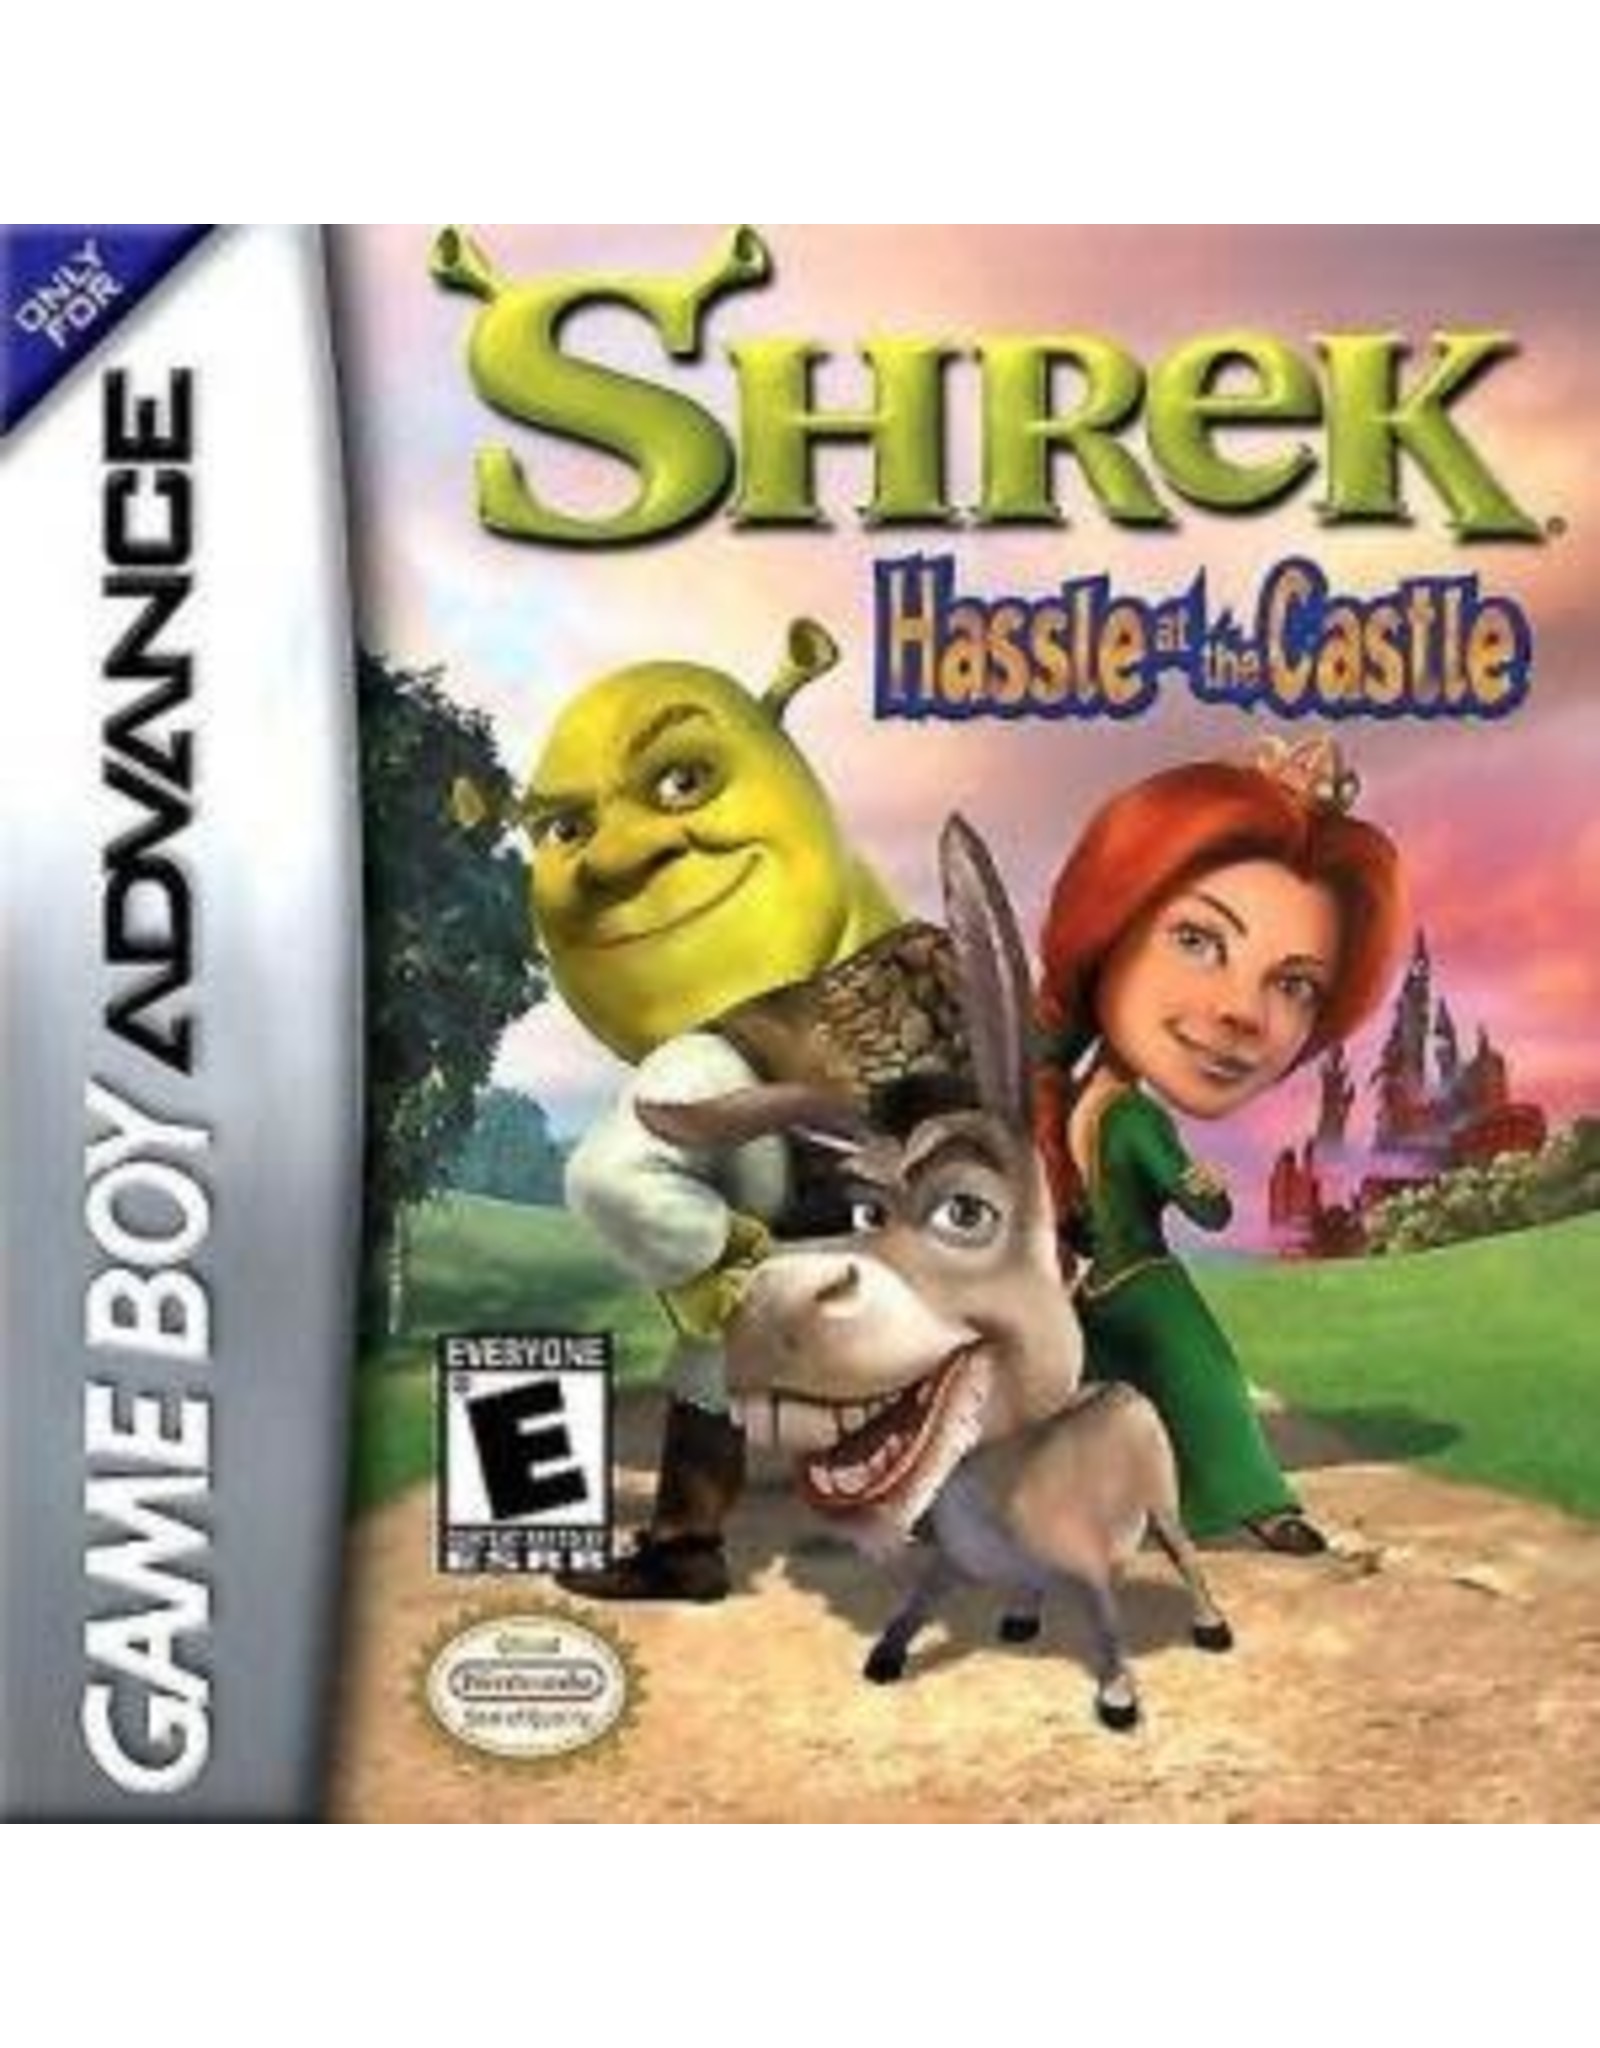 Game Boy Advance Shrek Hassle in the Castle (Cart Only, Damaged Label)